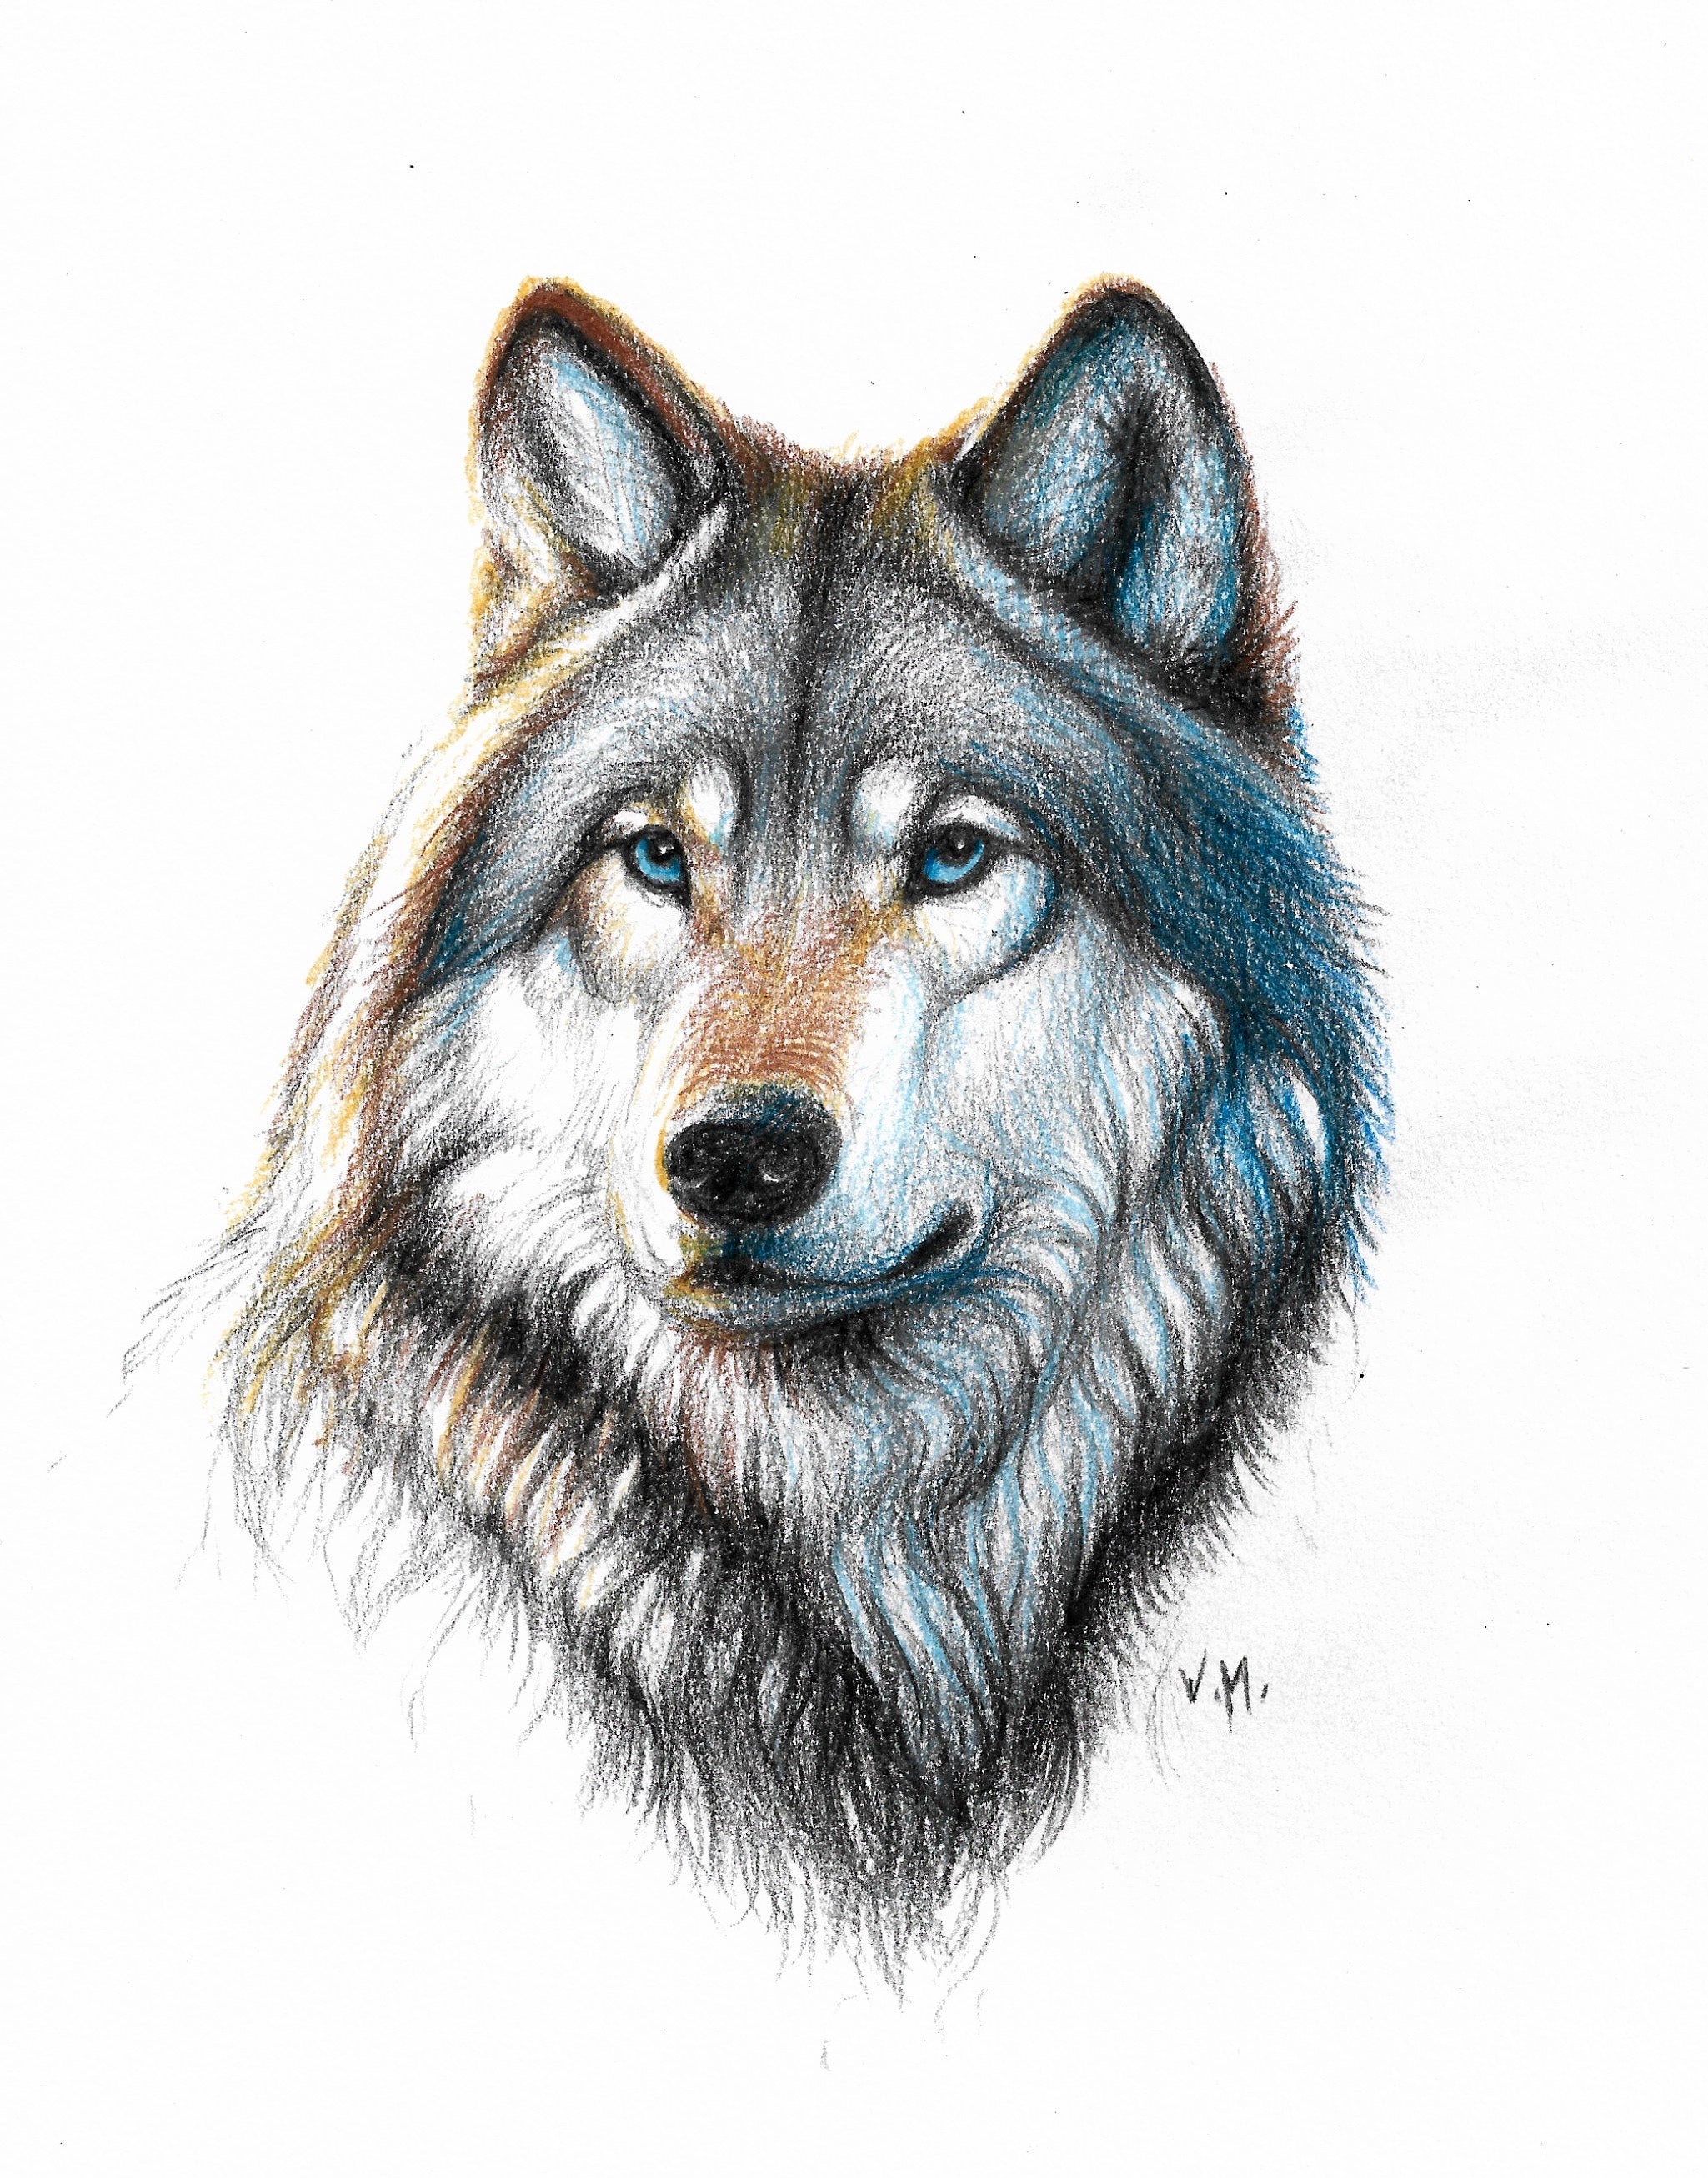 Wolf Art By Mrhd Featuring A Hyperrealistic Sketch Of A Wolf's Face With  Paws. The High-quality Photo Showcases The Realistic Portrayal Of Light And  Shadow, With Dark Proportions. The White Background Highlights